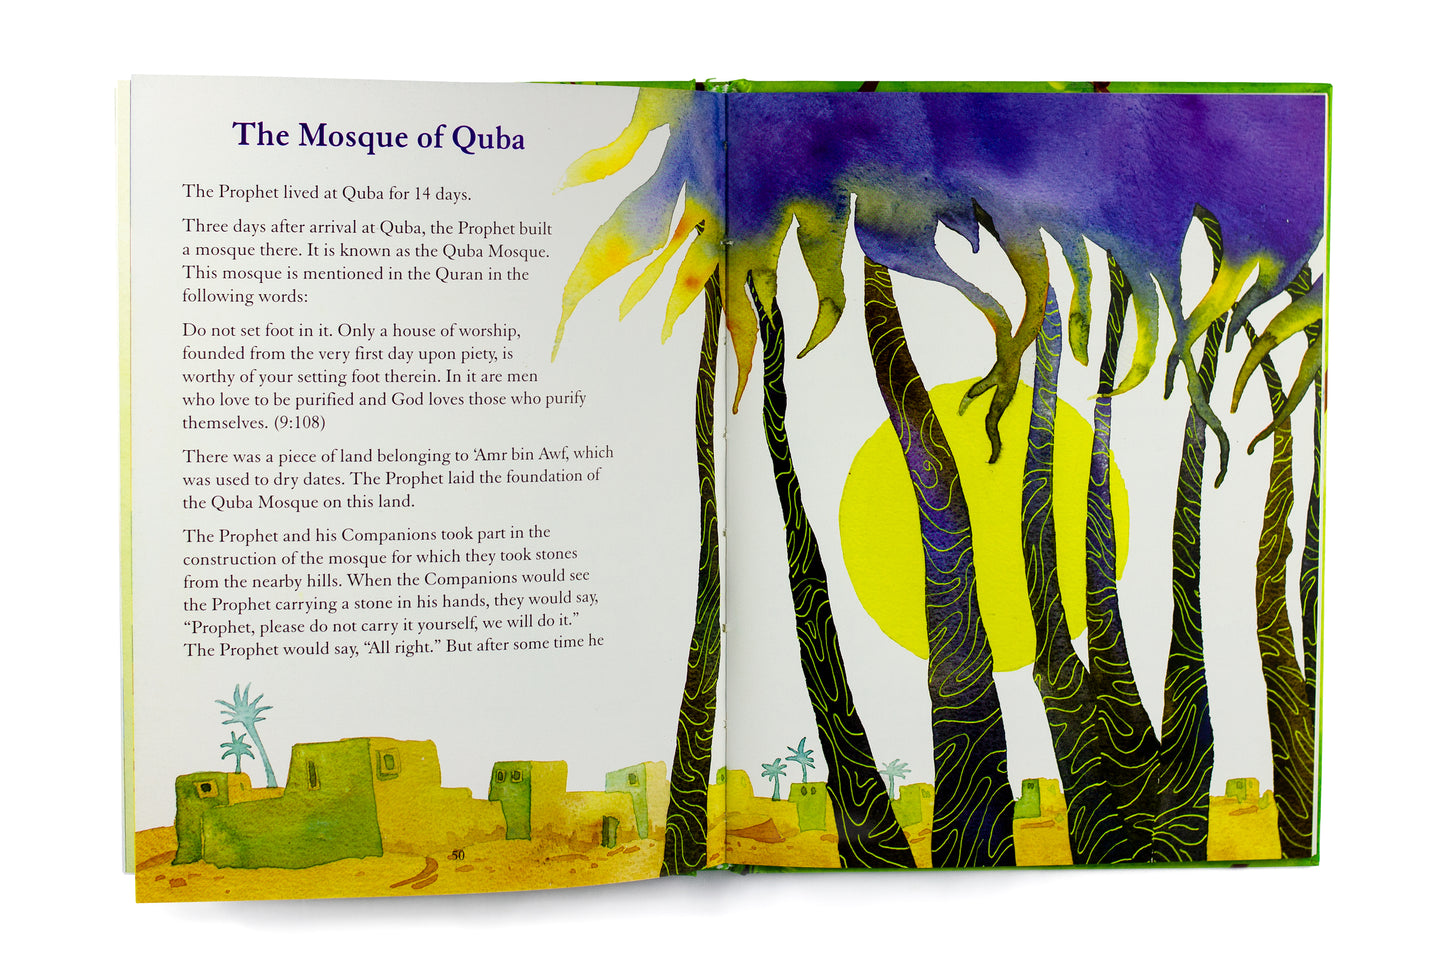 The Prophet Muhammad Stories for Children - Anafiya Gifts